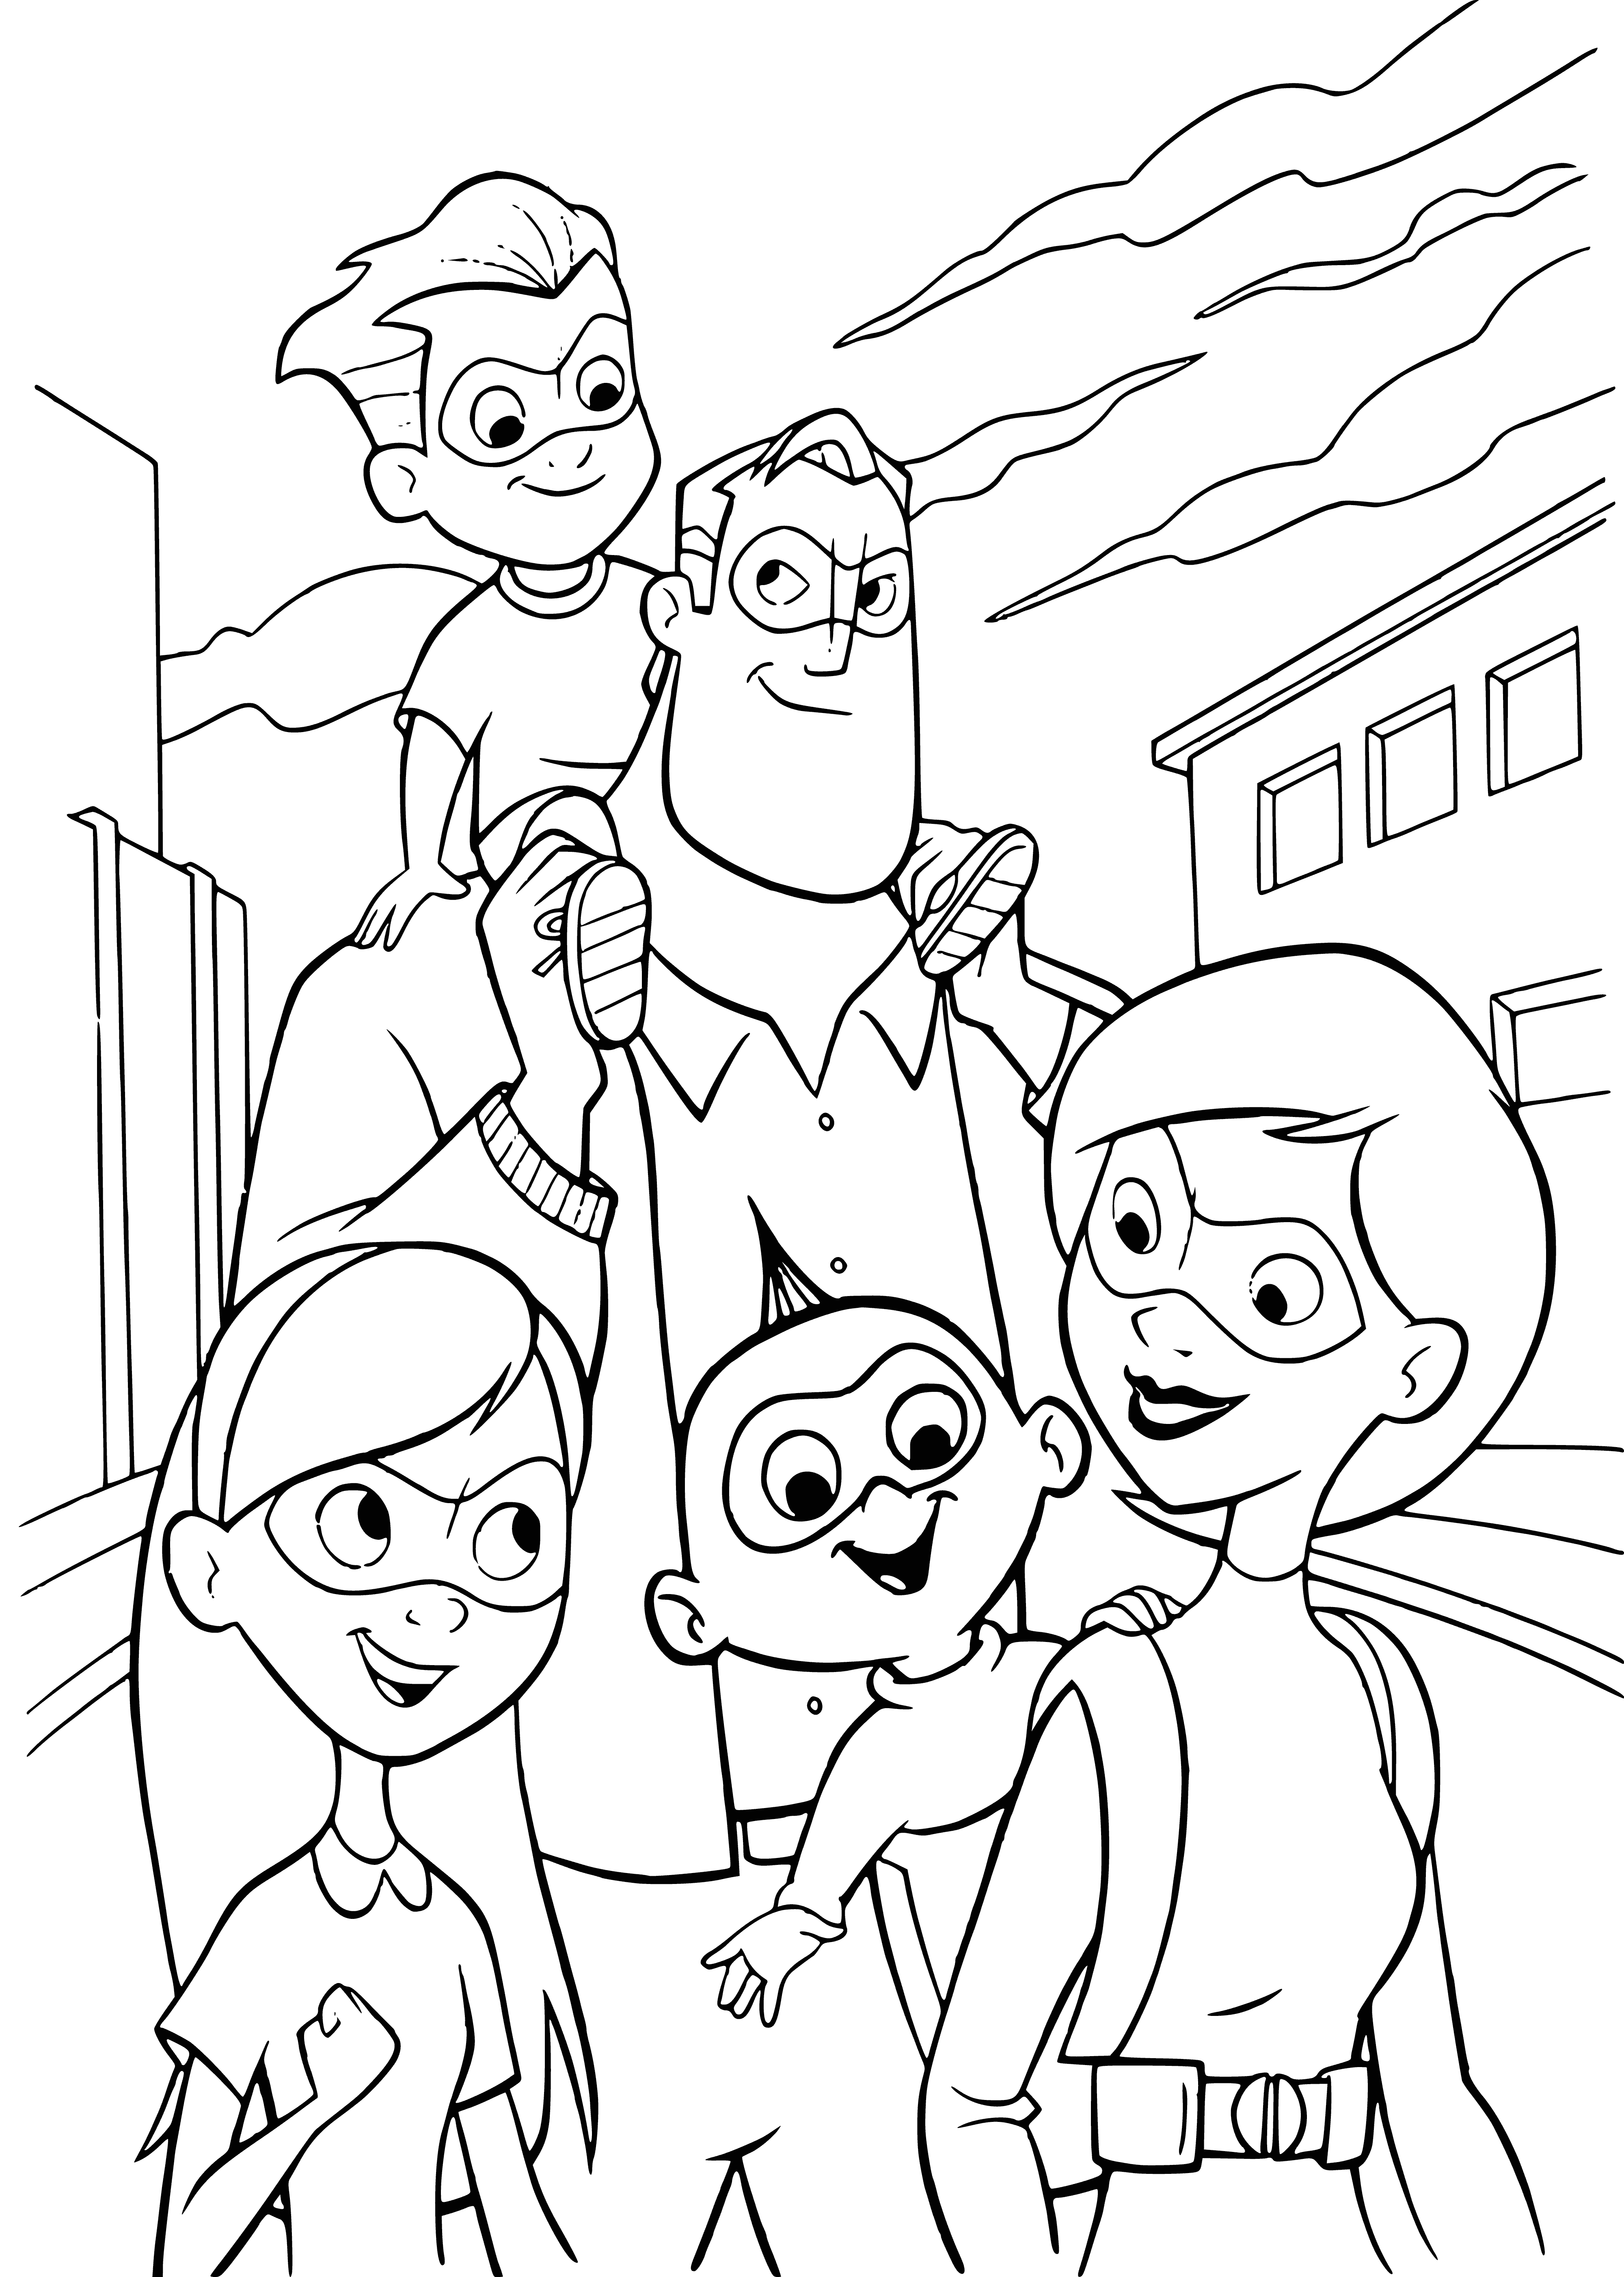 The Incredibles coloring page